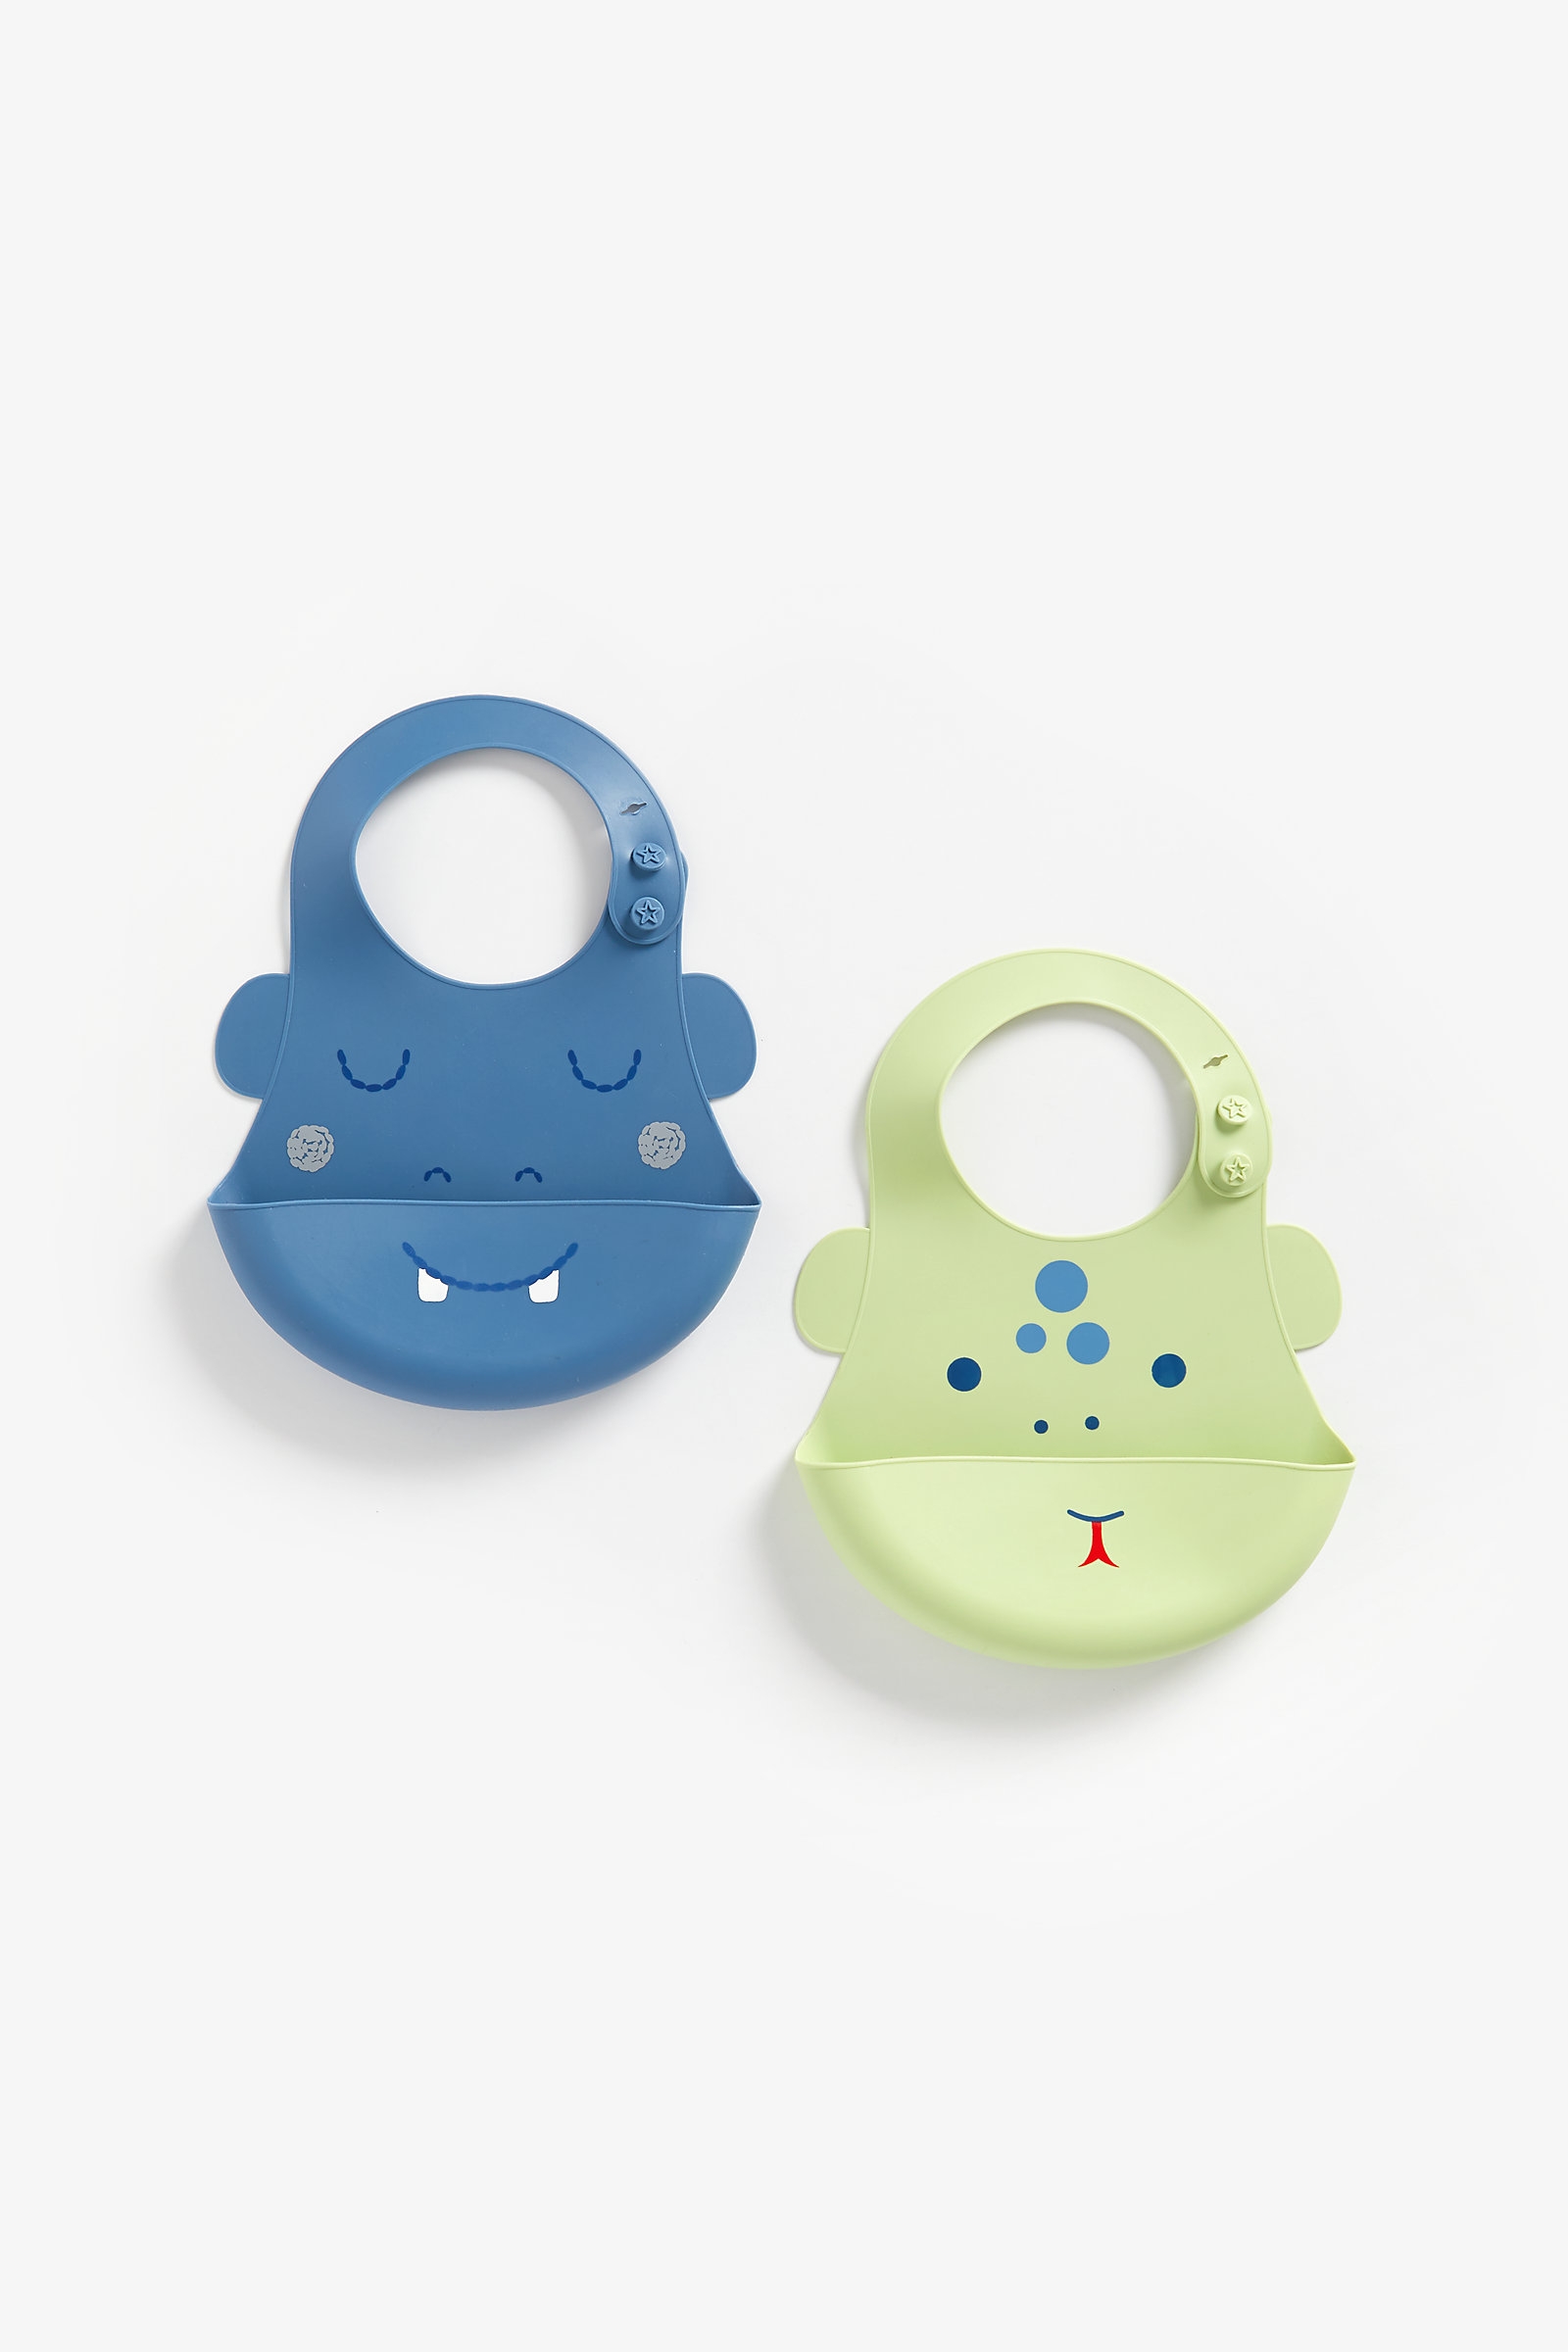 Mothercare | Mothercare Faces Crumb-catcher Blue Pack of 2 0